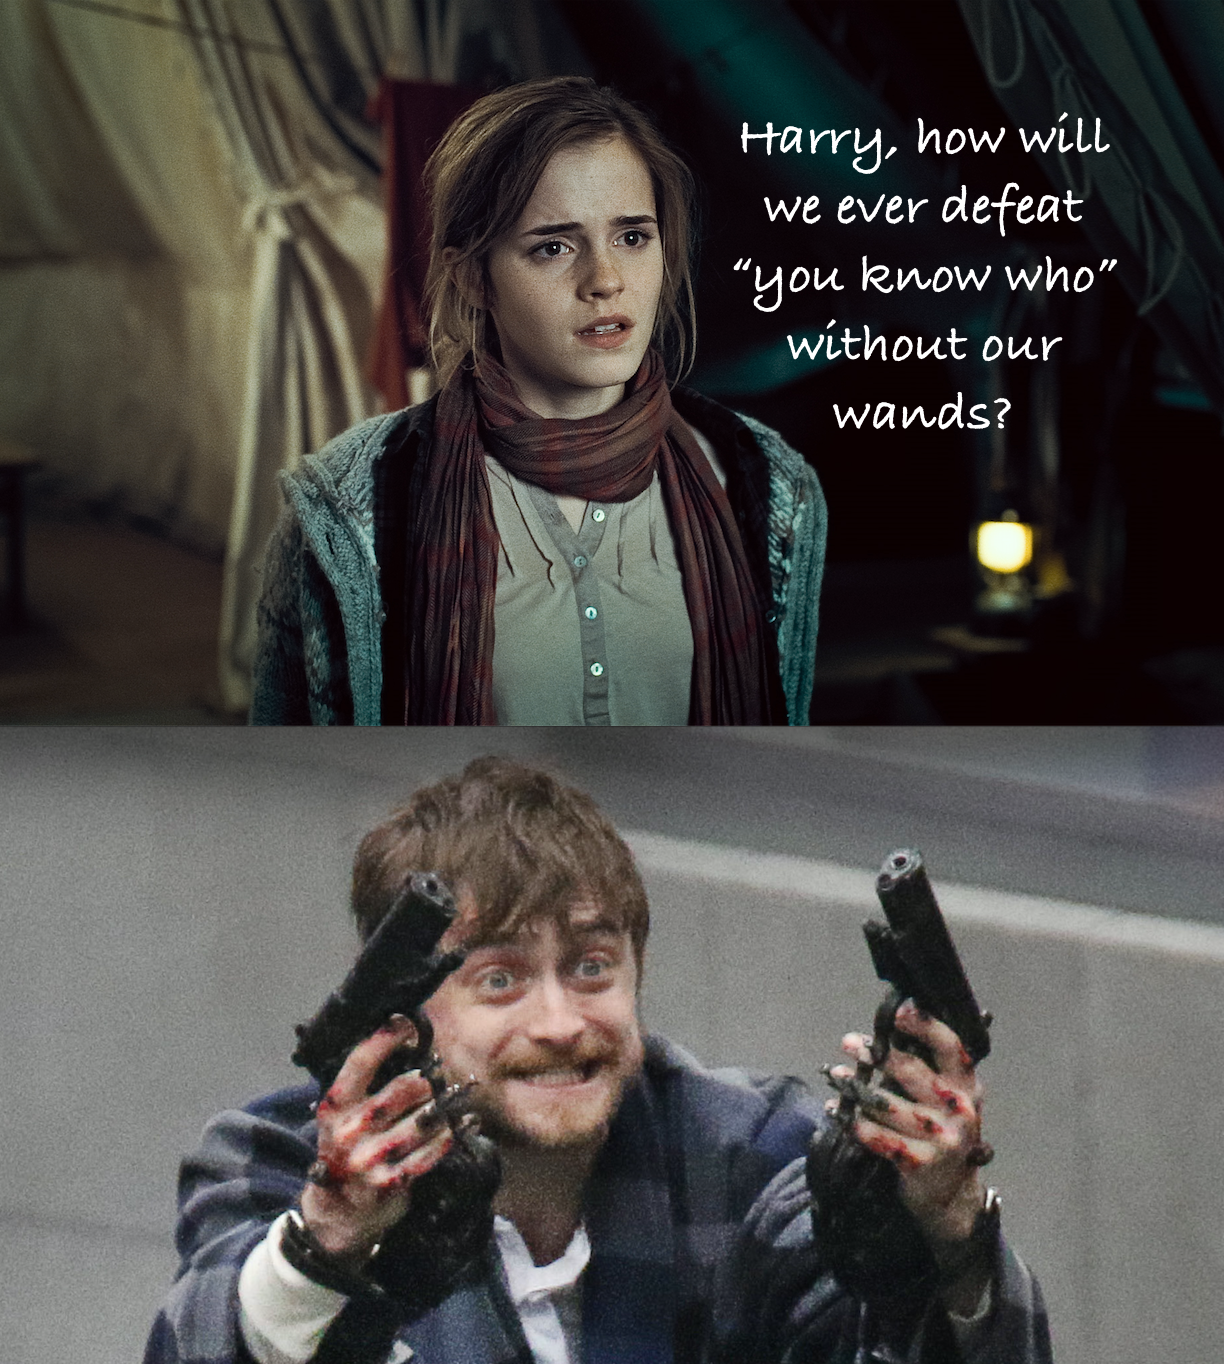 What if harry potter meme